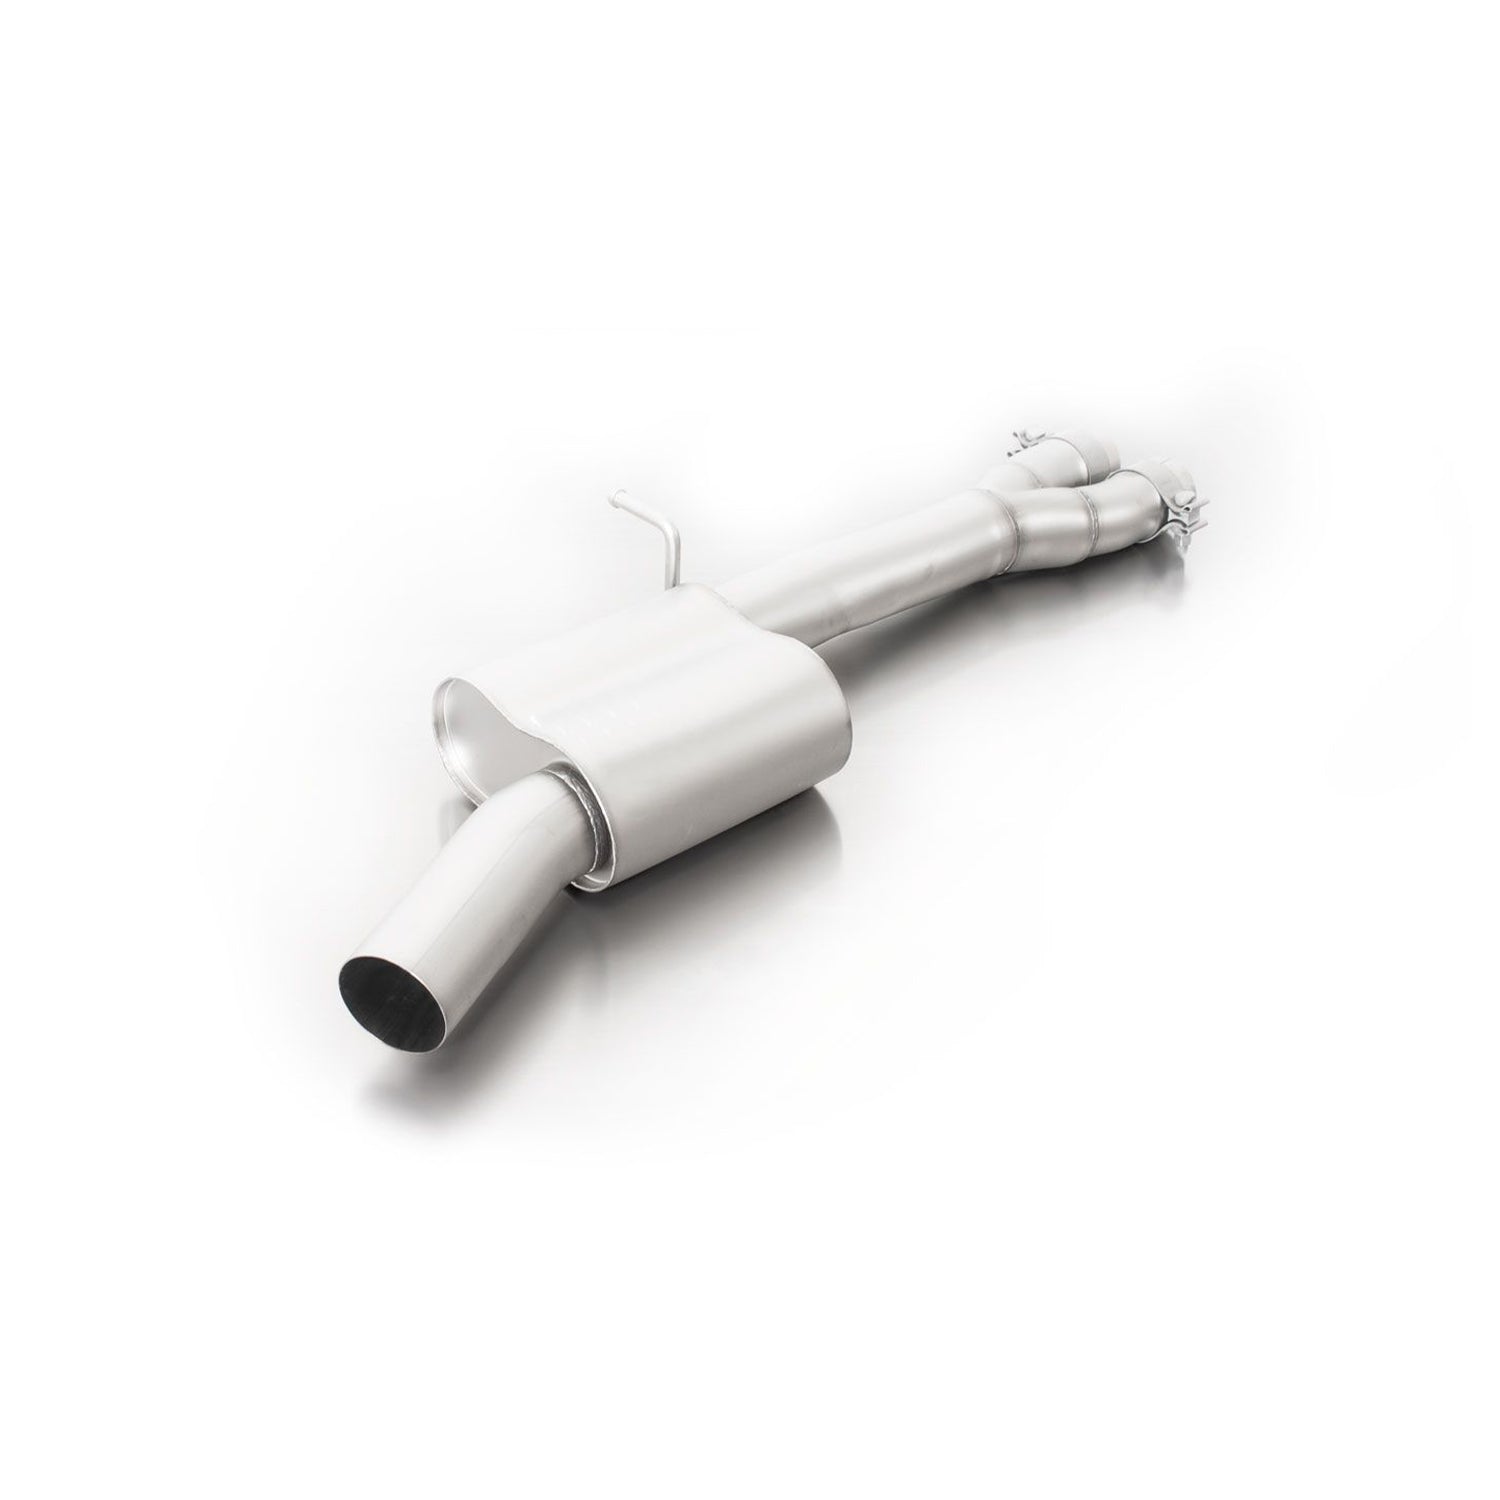 Remus Audi RS3 Sportback GPF Back Exhaust System (8Y)-R44 Performance